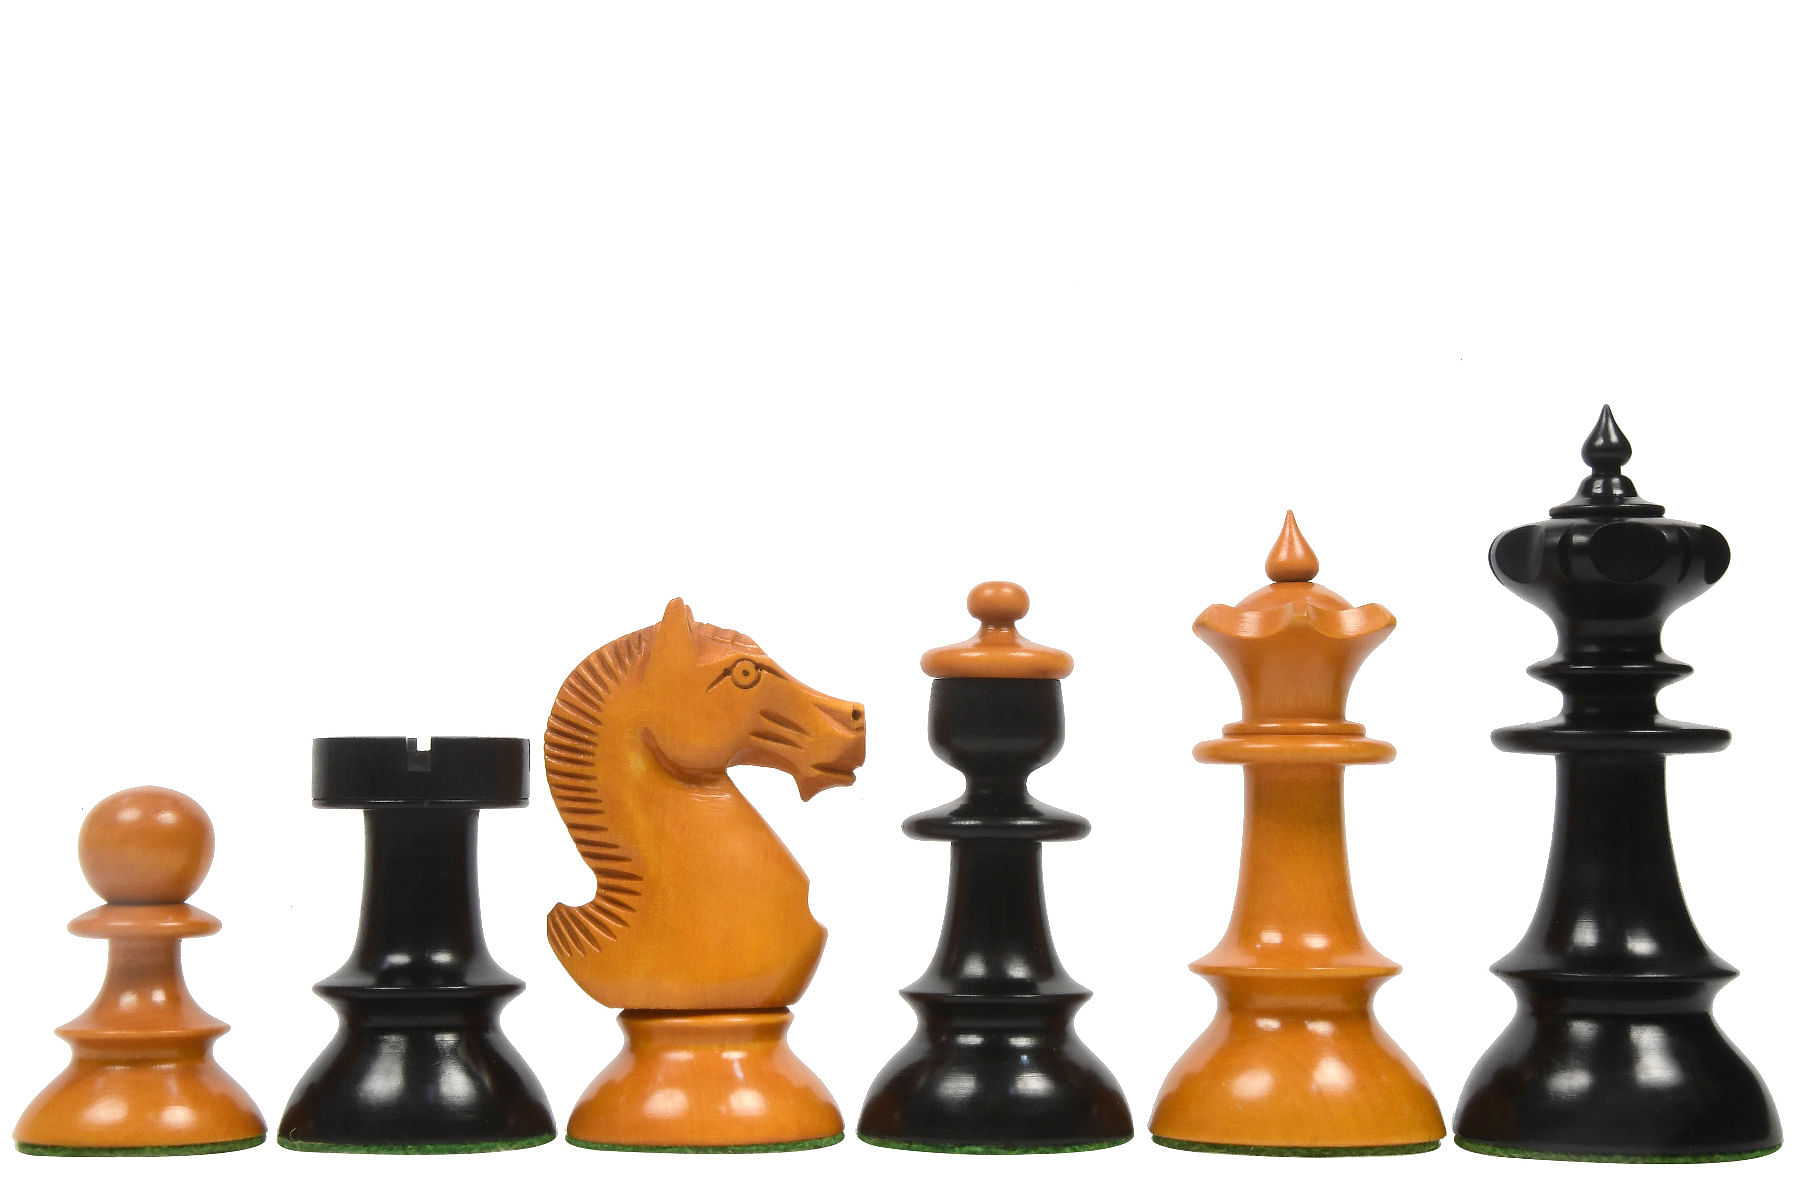 Reproduced Vintage Series Original Austrian Coffee House Old Vienna Chess Pieces in Ebonized and Antique Boxwood V2.0- 3.75